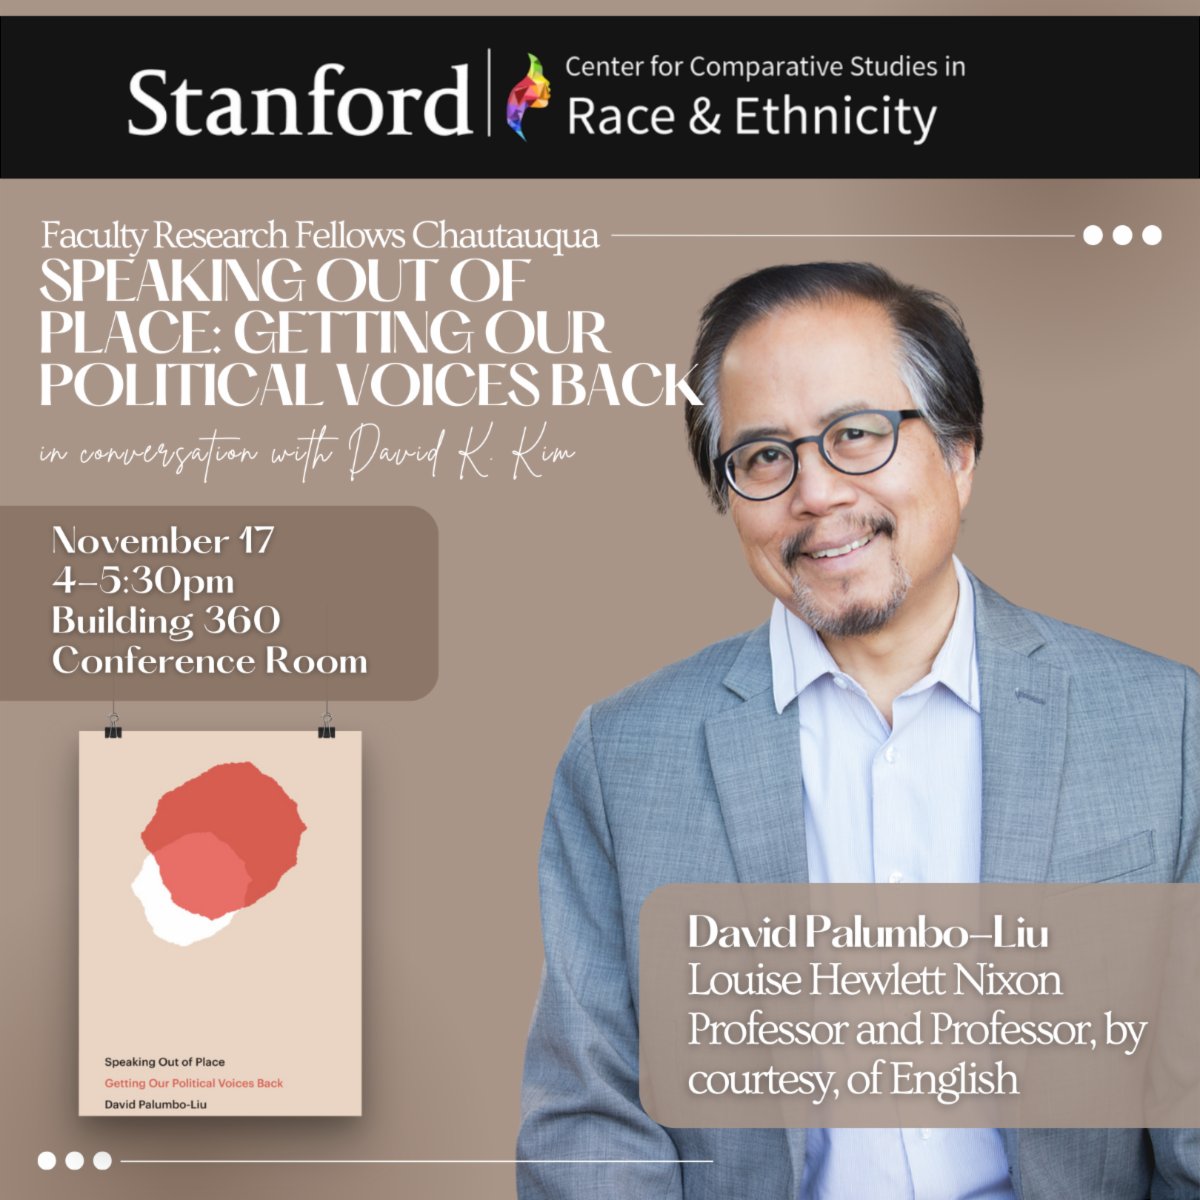 Faculty Research Fellows Chautauqua featuring David Palumbo-Liu, Comparative Literature 'Speaking Out of Place: Getting Our Political Voices Back' November 17, 2022 from 4-5:30pm Building 360, Conference Room, Main Quad conta.cc/3DZn9ga